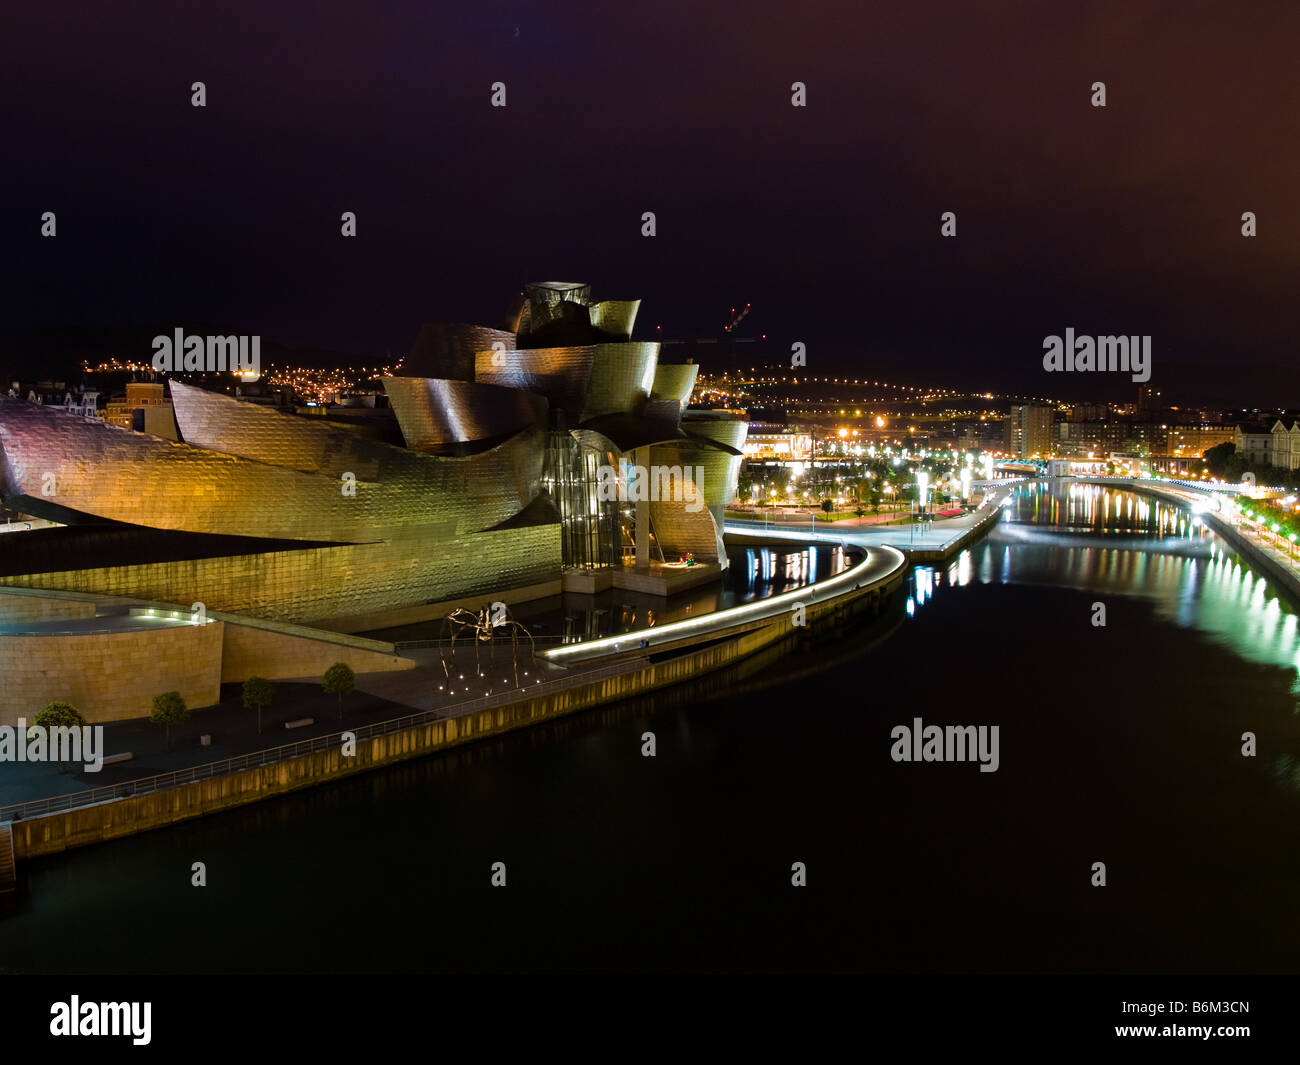 The magnificent Guggenheim Museum Bilbao, by Canadian architect Frank O. Gehry, glows at night. Stock Photo